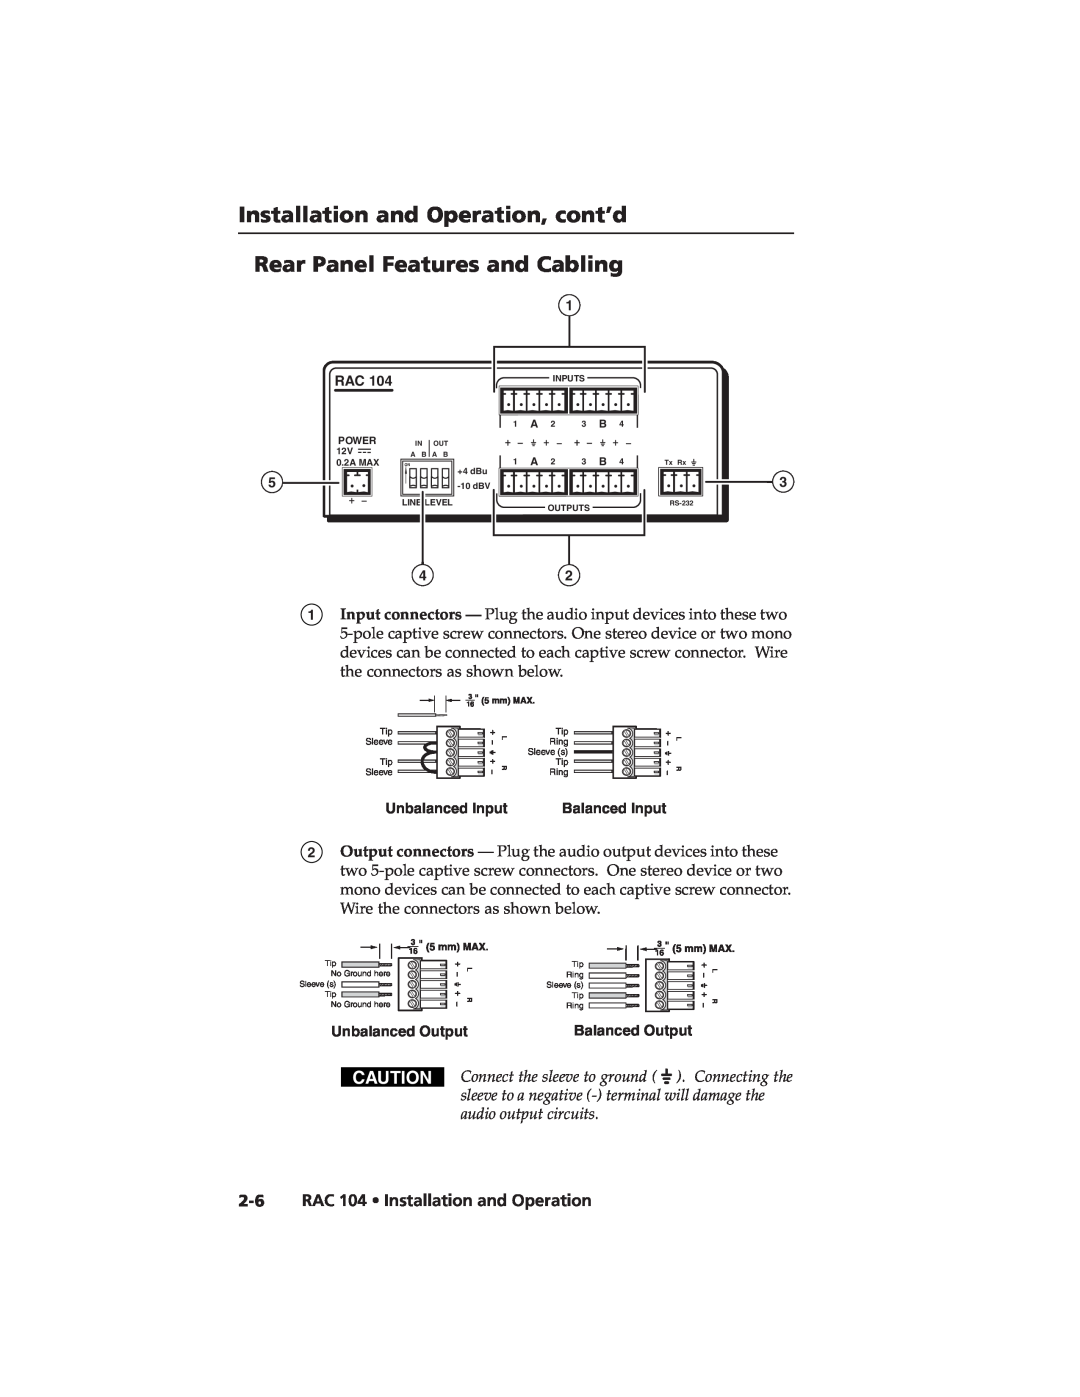 Extron electronic user manual Rear Panel Features and Cabling, 2-6RAC 104 Installation and Operation 